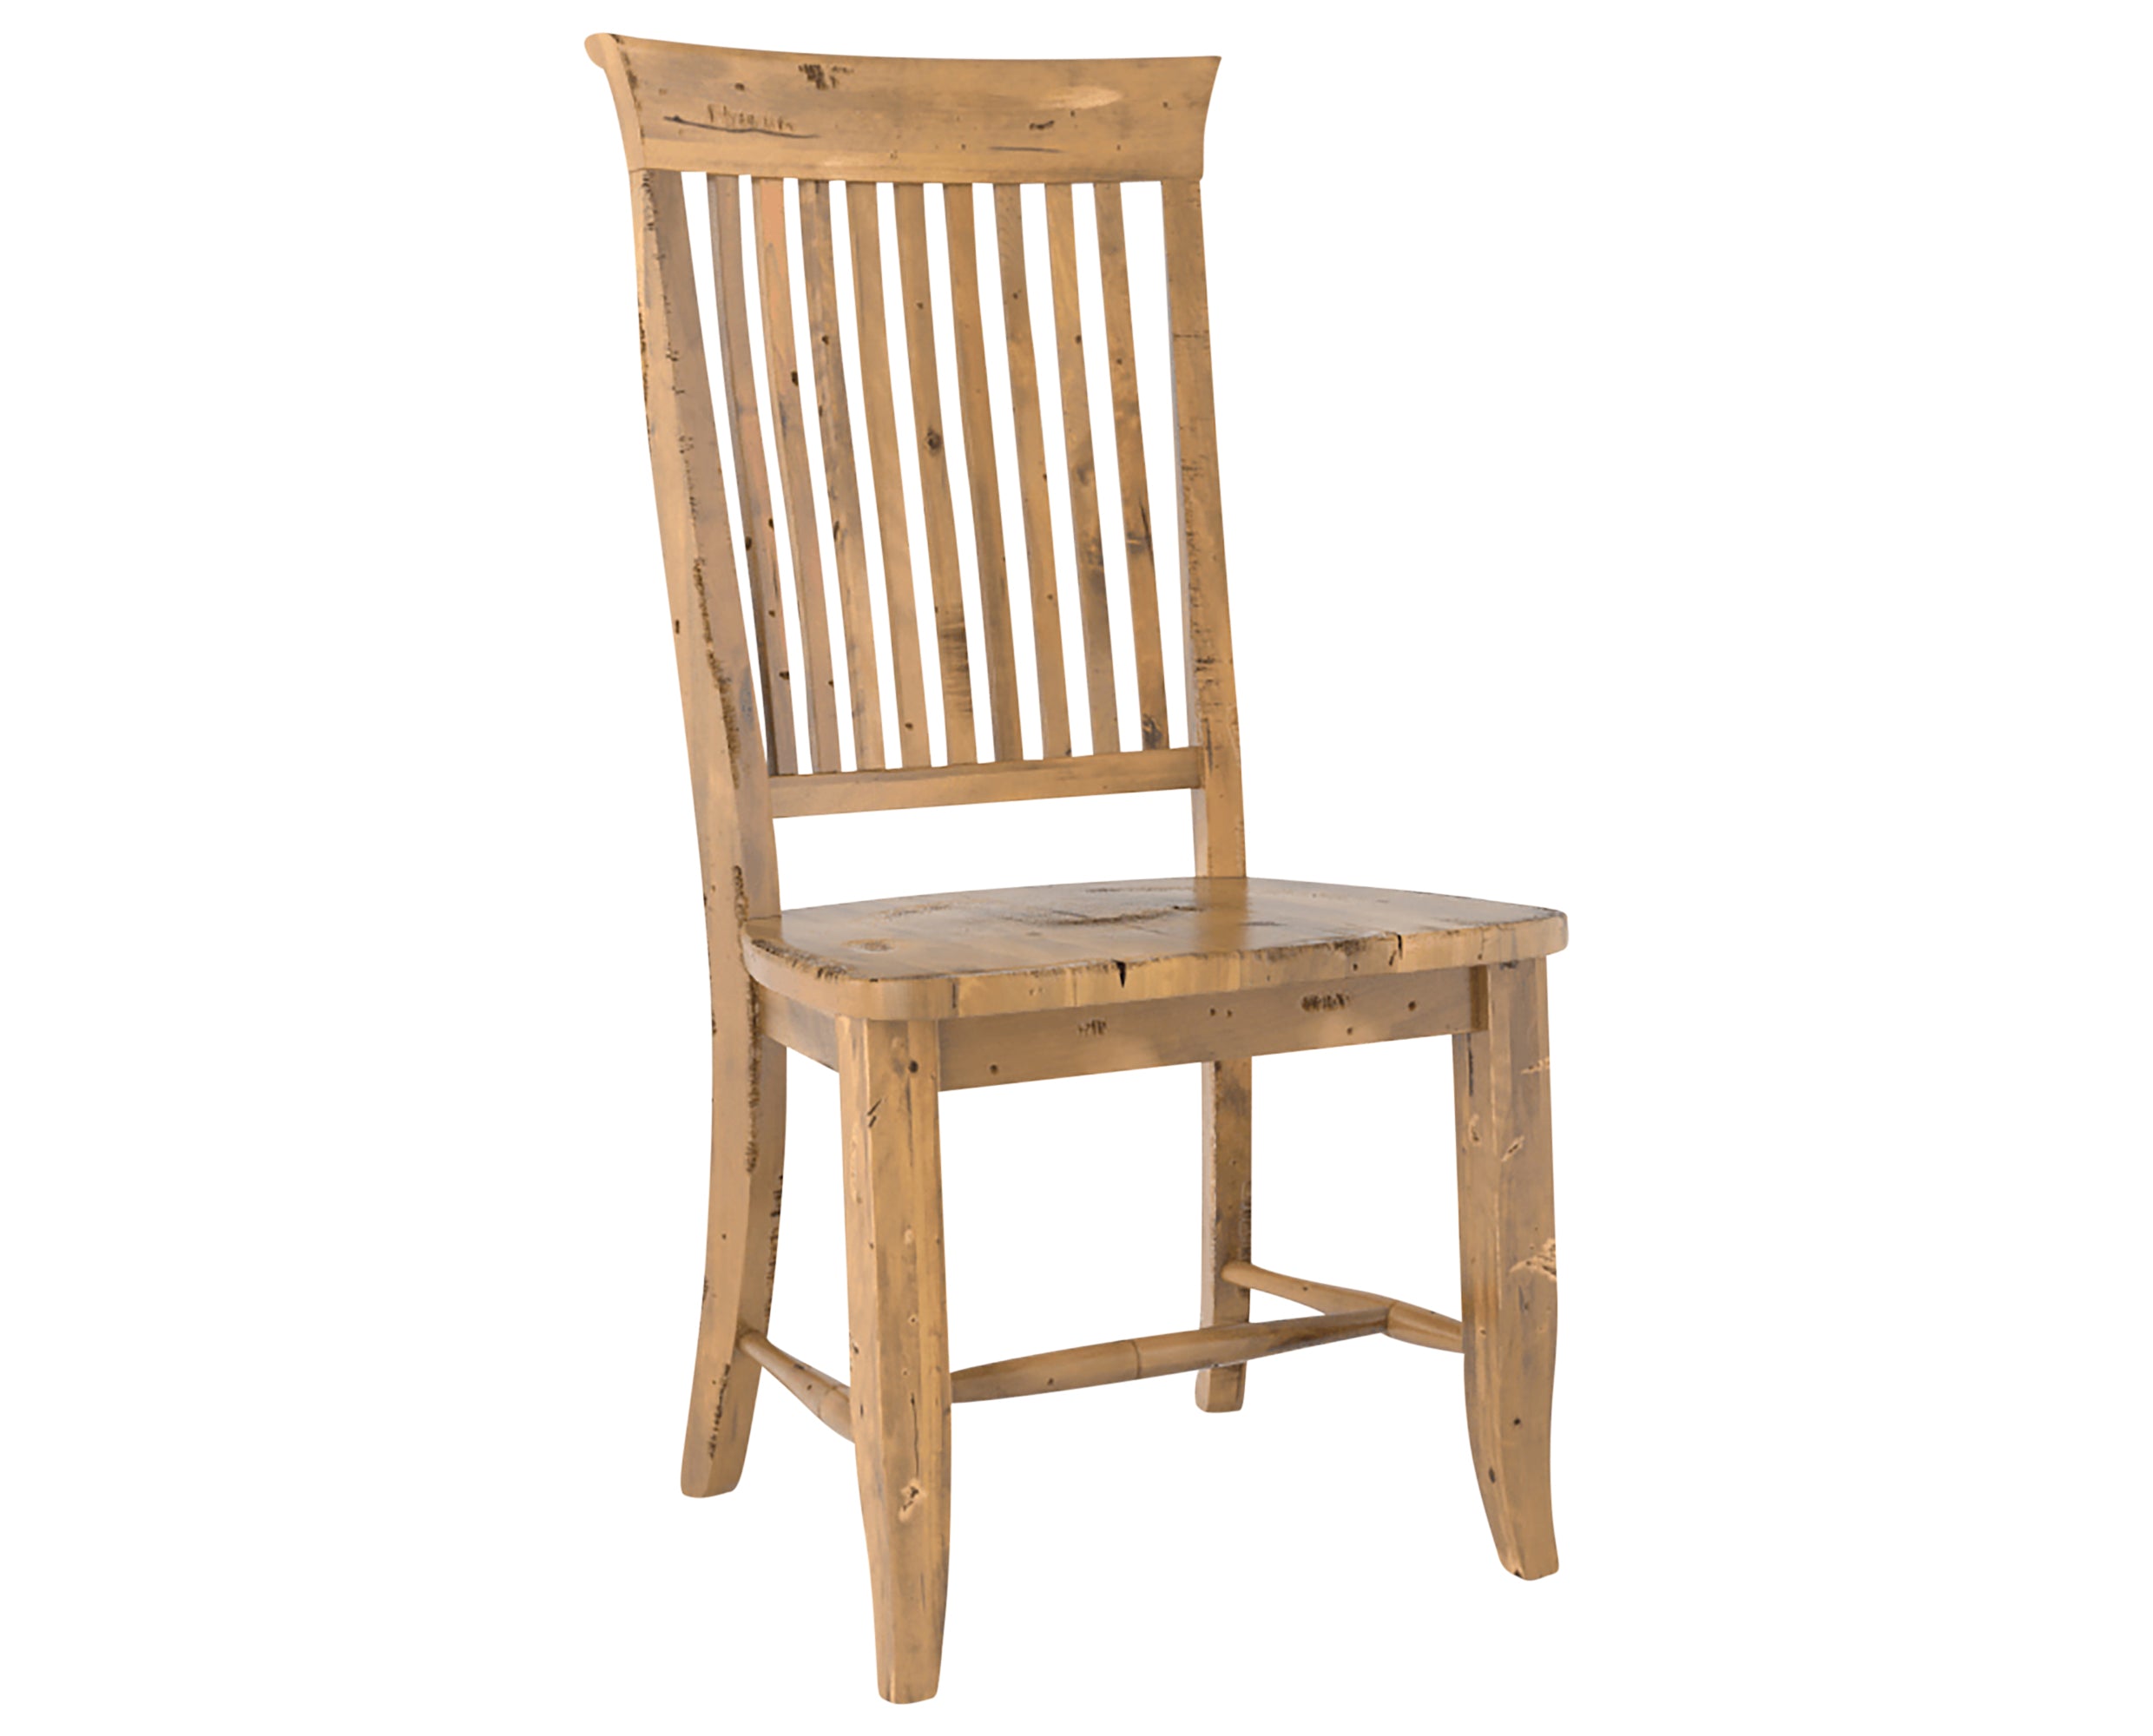 Oak Washed | Canadel Champlain Dining Chair 3528 | Valley Ridge Furniture